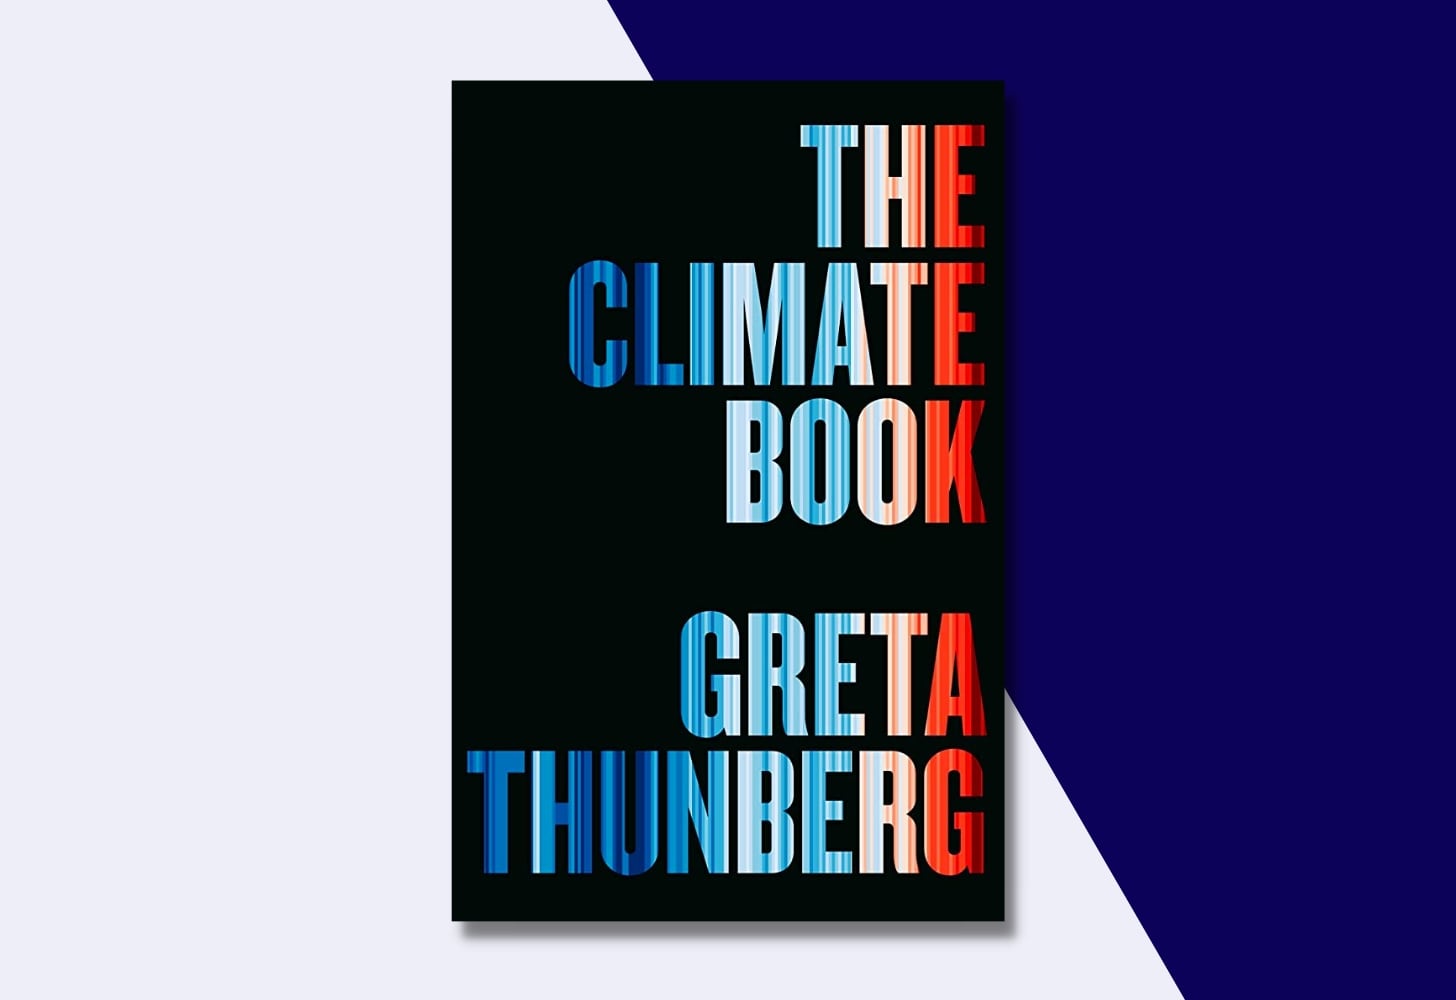 “The Climate Book: The Facts and the Solutions” by Greta Thunberg